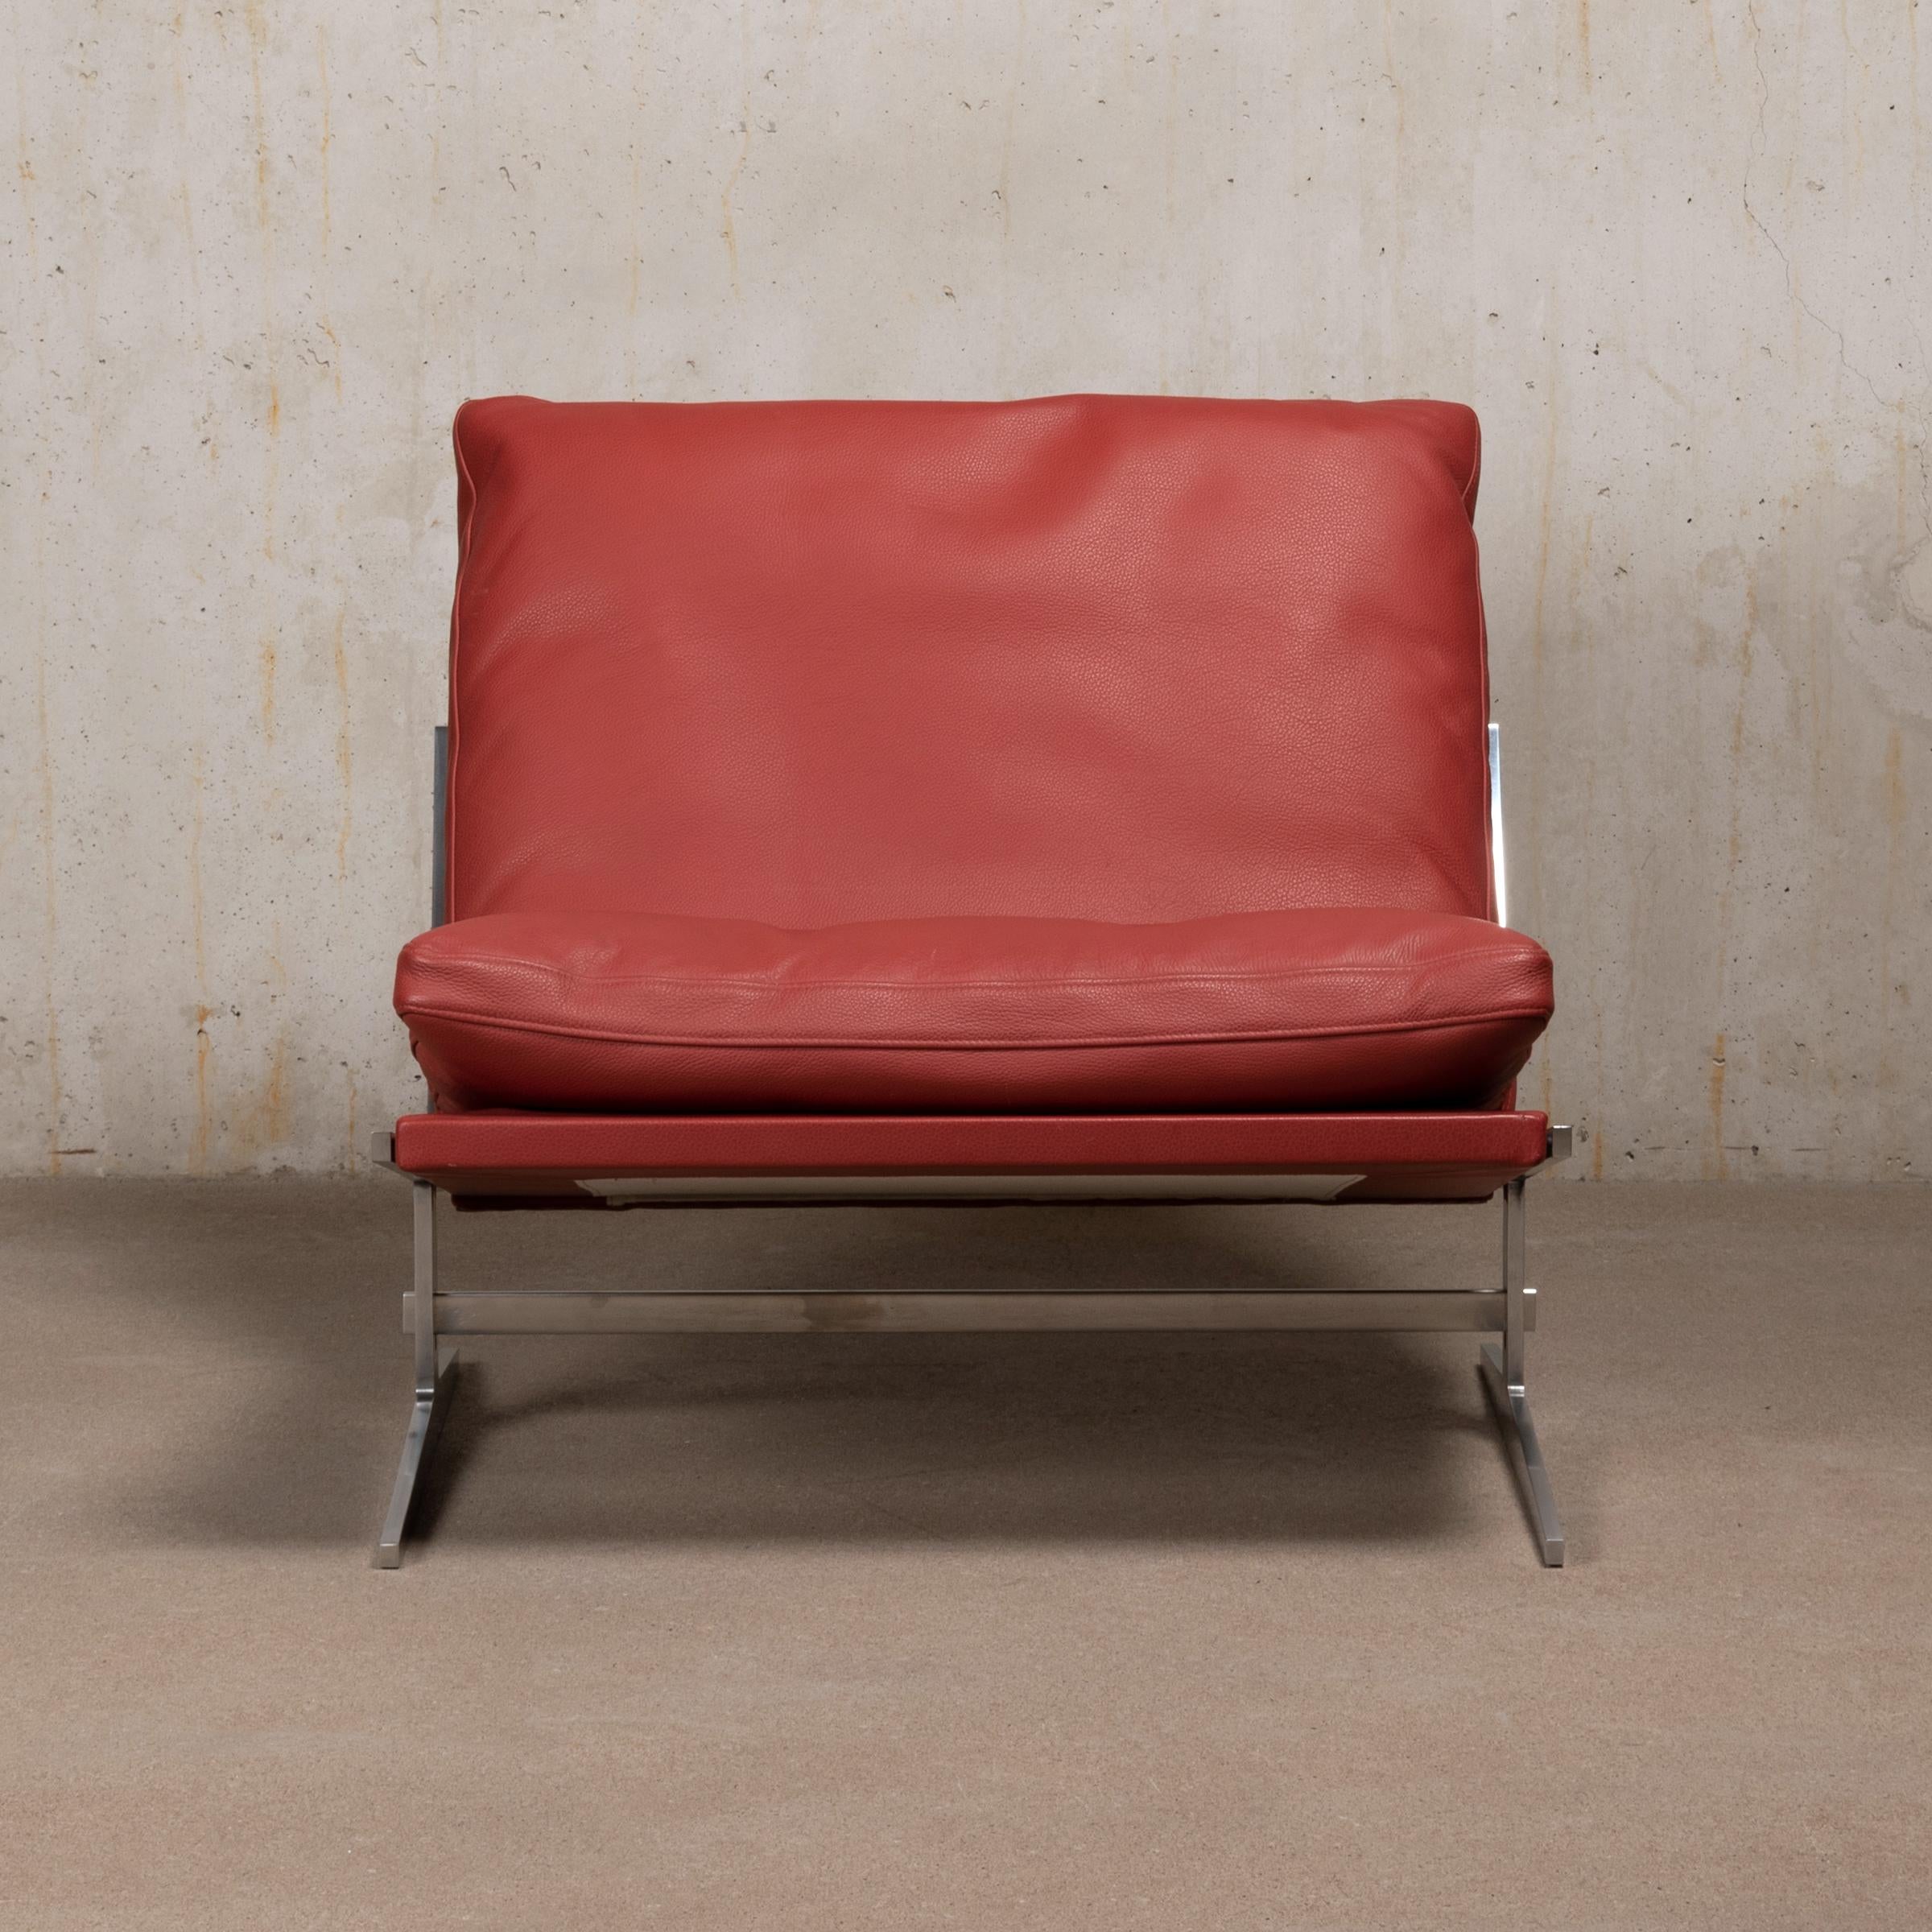 Beautiful slipper lounge chair by Jørgen Kastholm & Preben Fabricius model Bo-561 produced by Bo-Ex in Denmark. Polished steel frame and recent Ruby Red leather upholstery with down feathers filled cushions all in very good condition with only